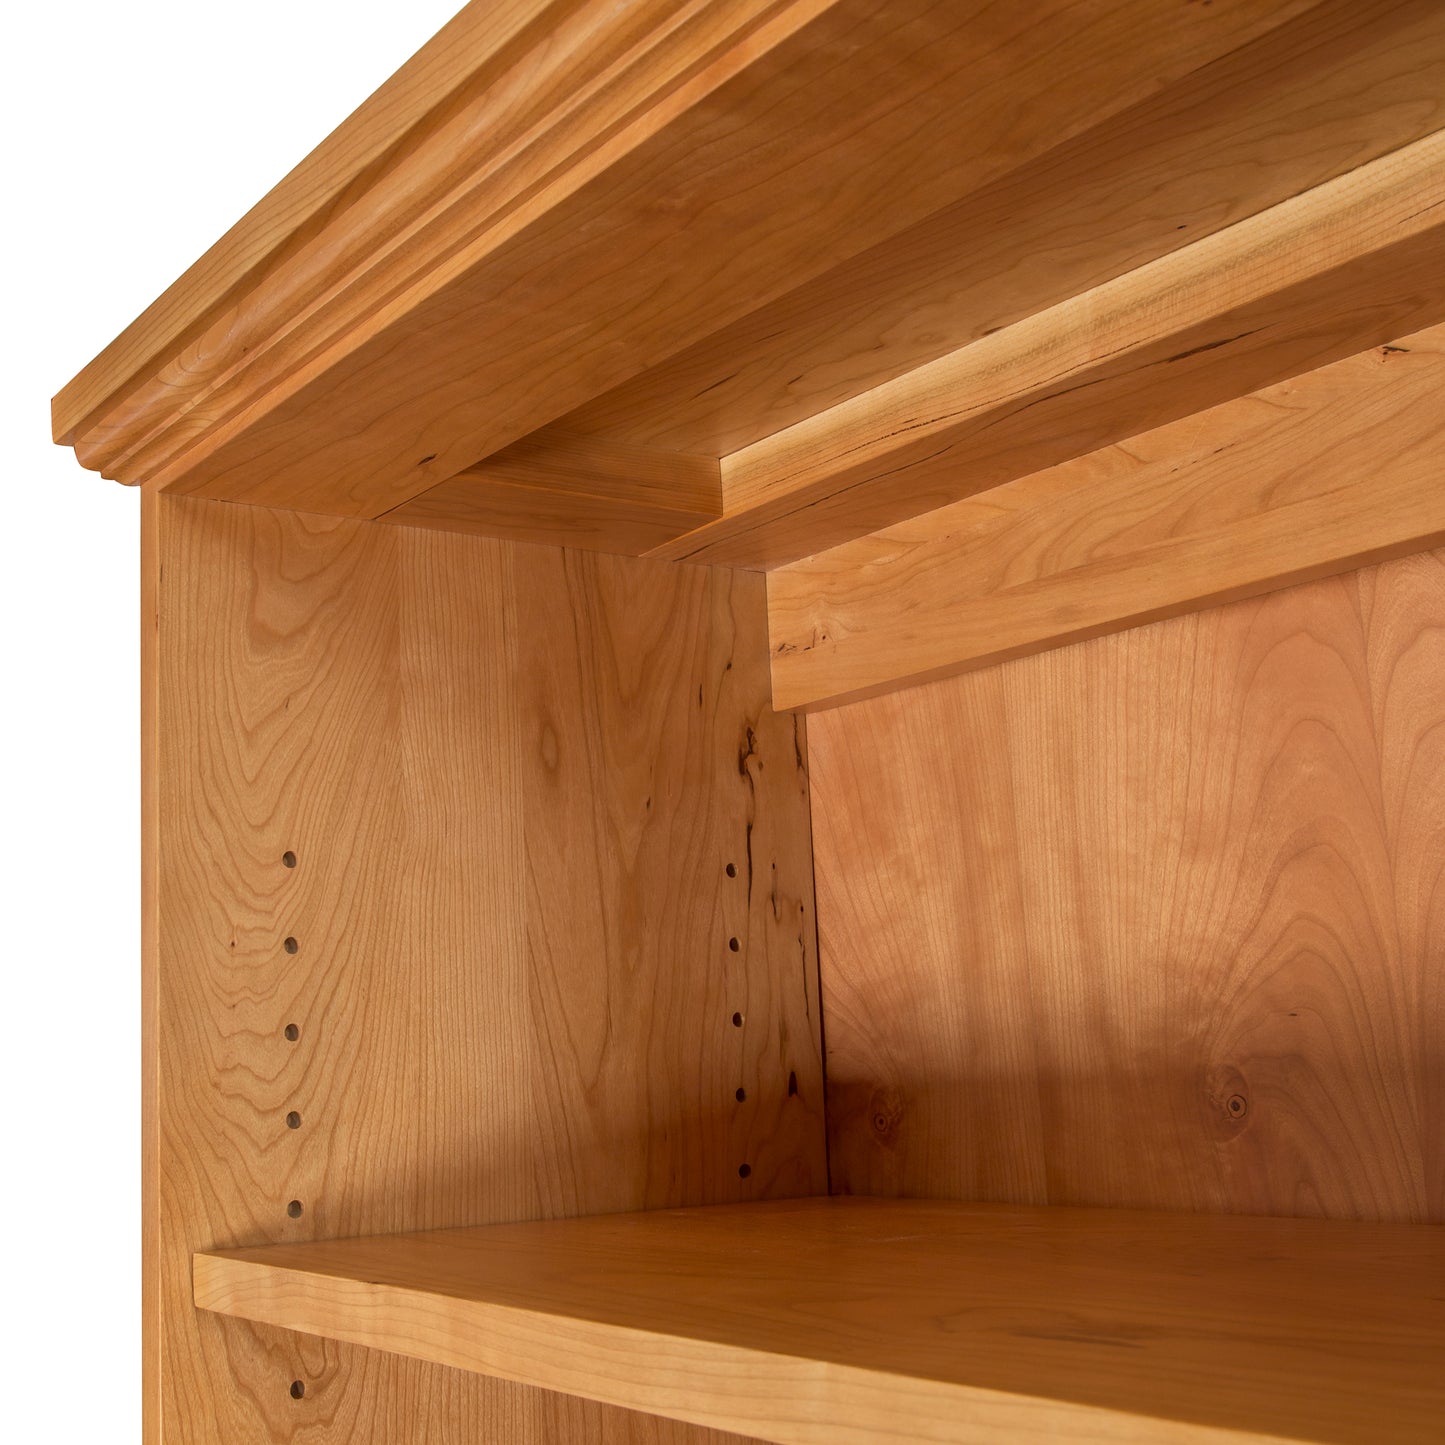 A close up of a Lyndon Furniture Shaker Bookcase with shelves.